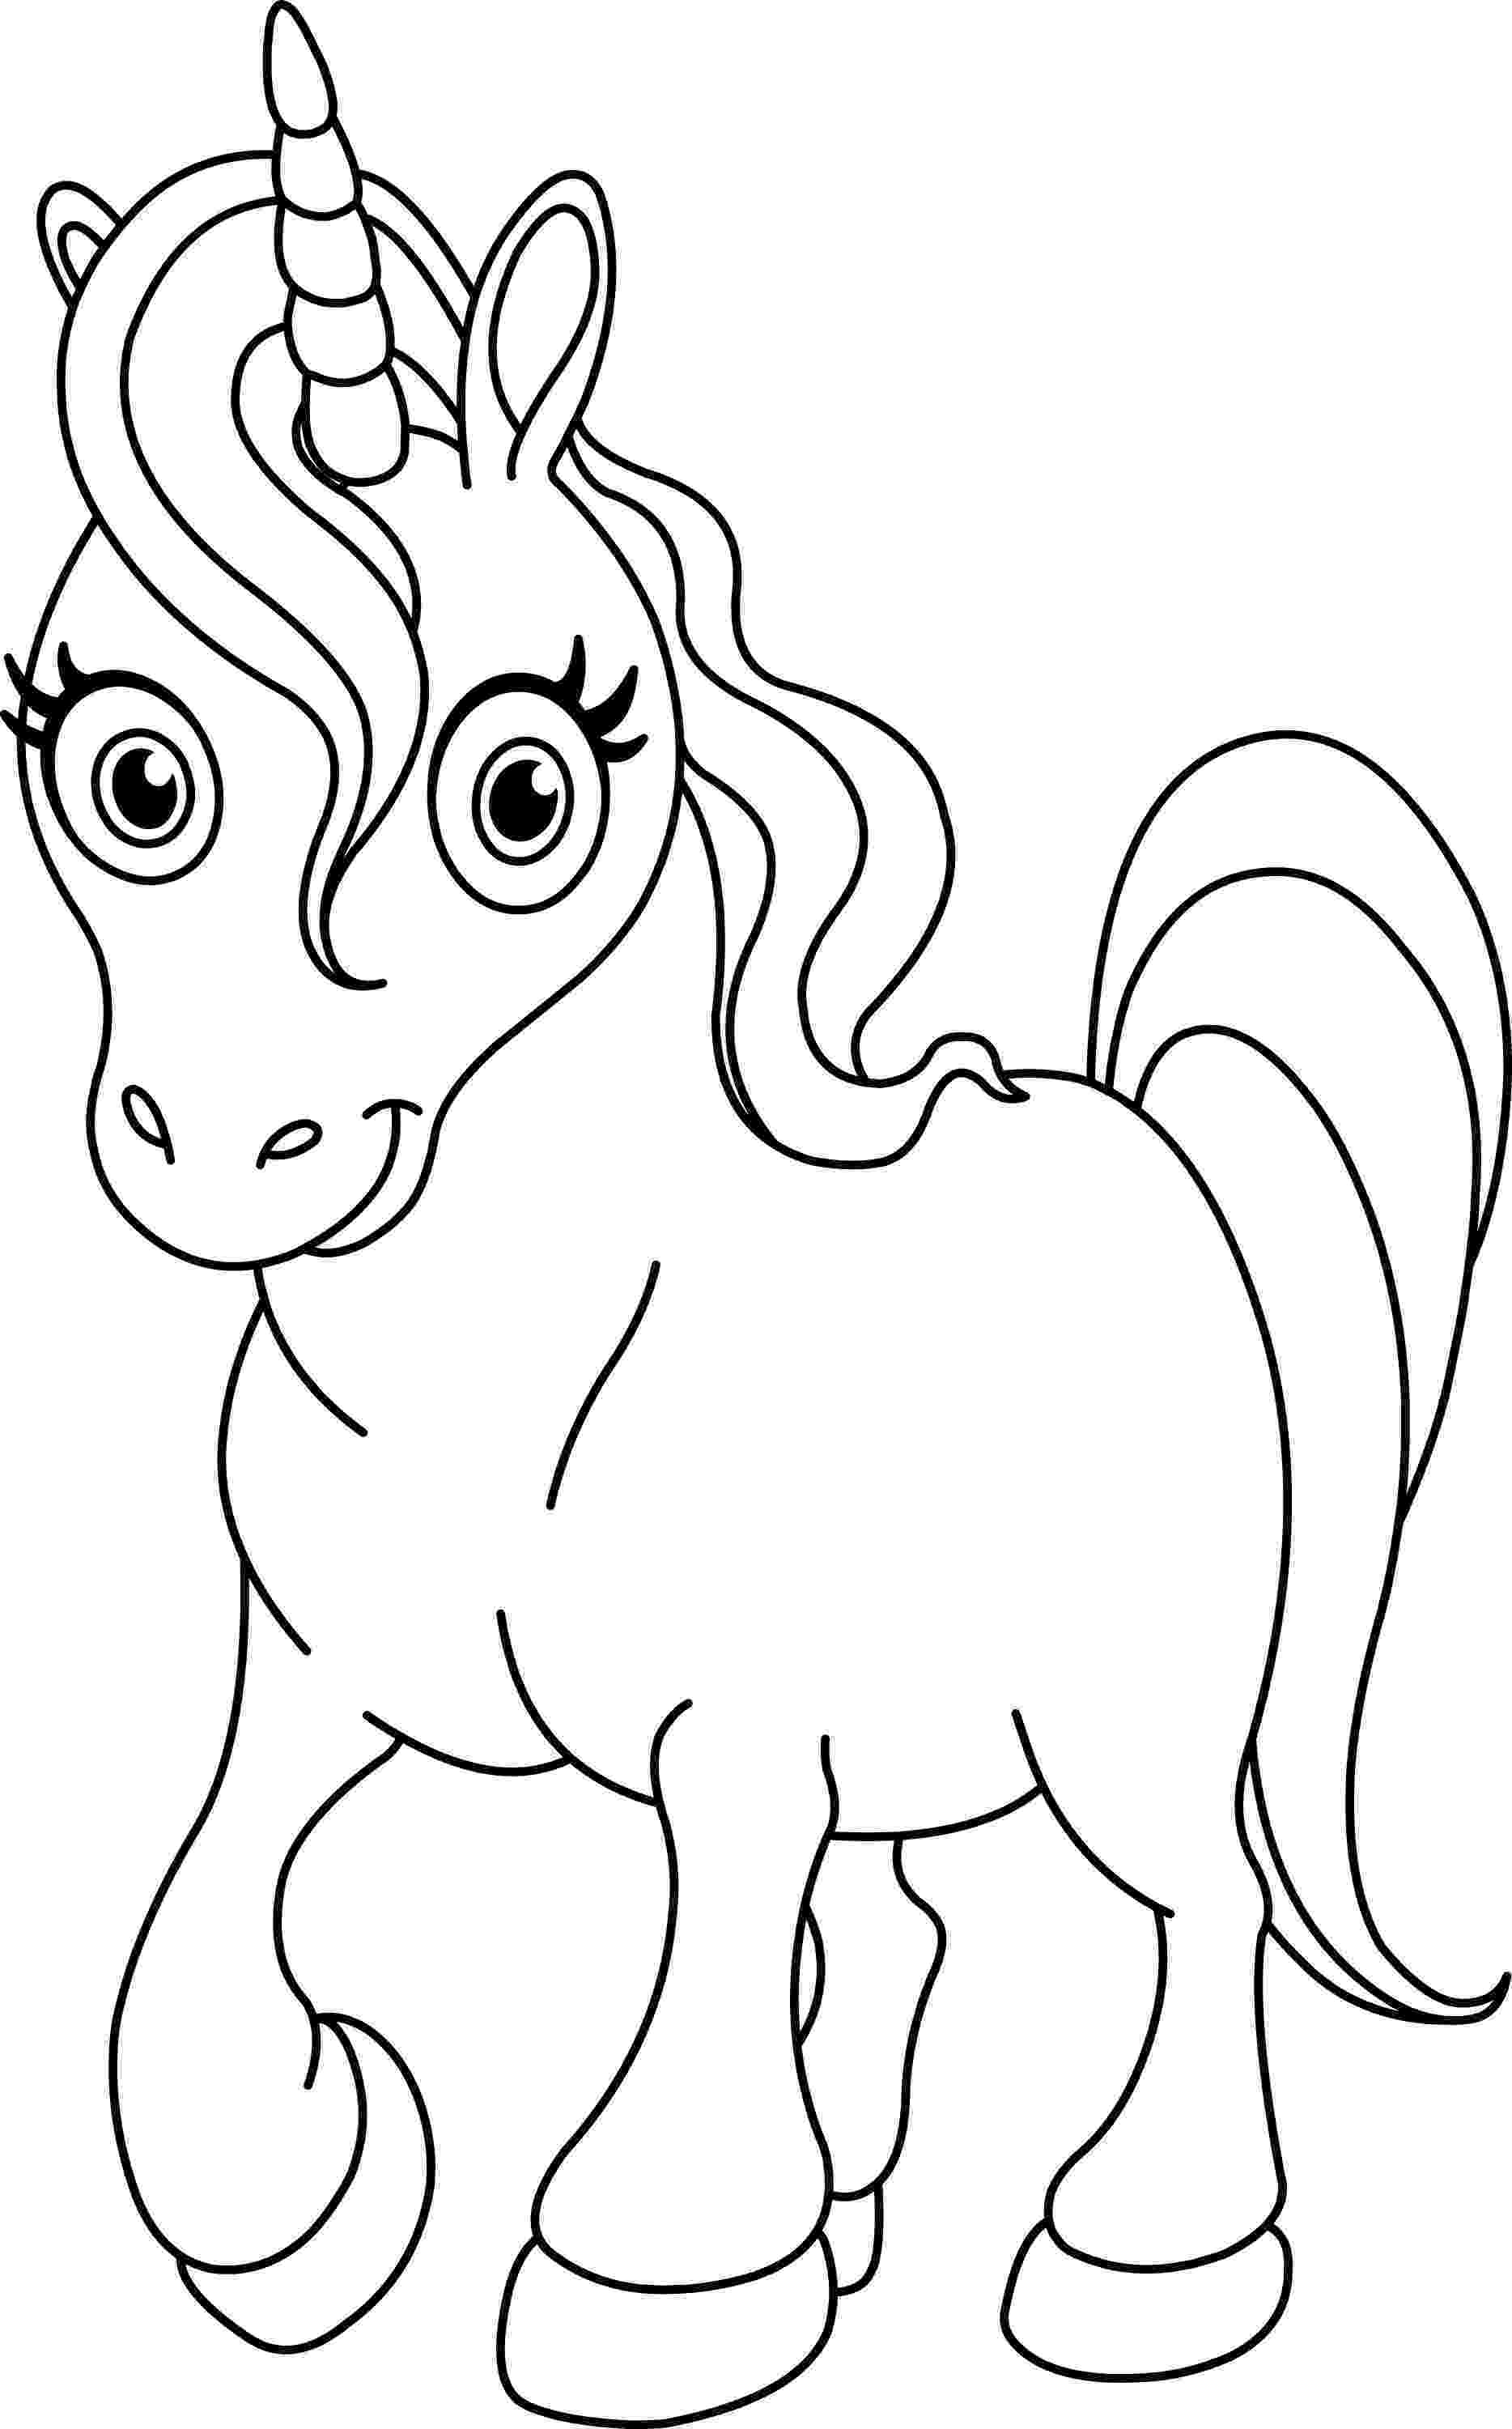 free unicorn pictures to color unicorn coloring pages to download and print for free color free unicorn pictures to 